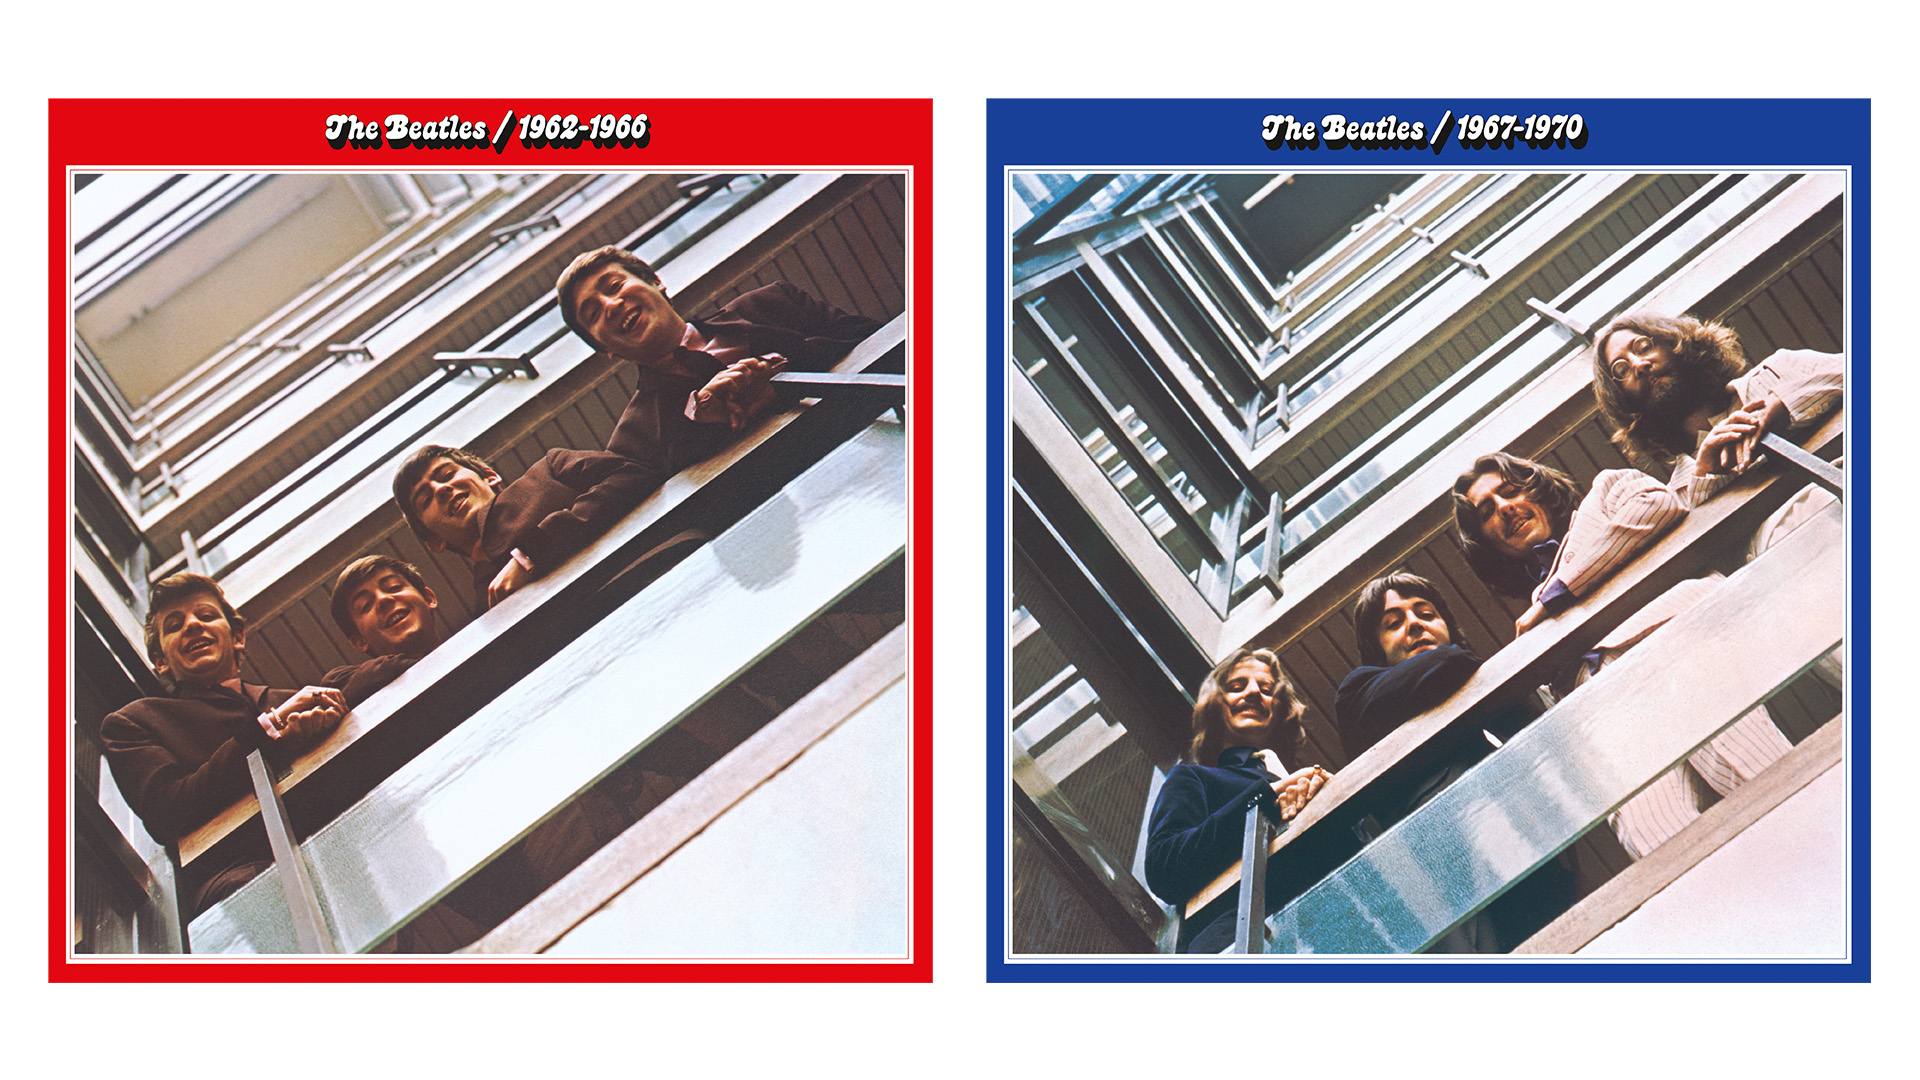 The Beatles Red Album and Blue Album covers